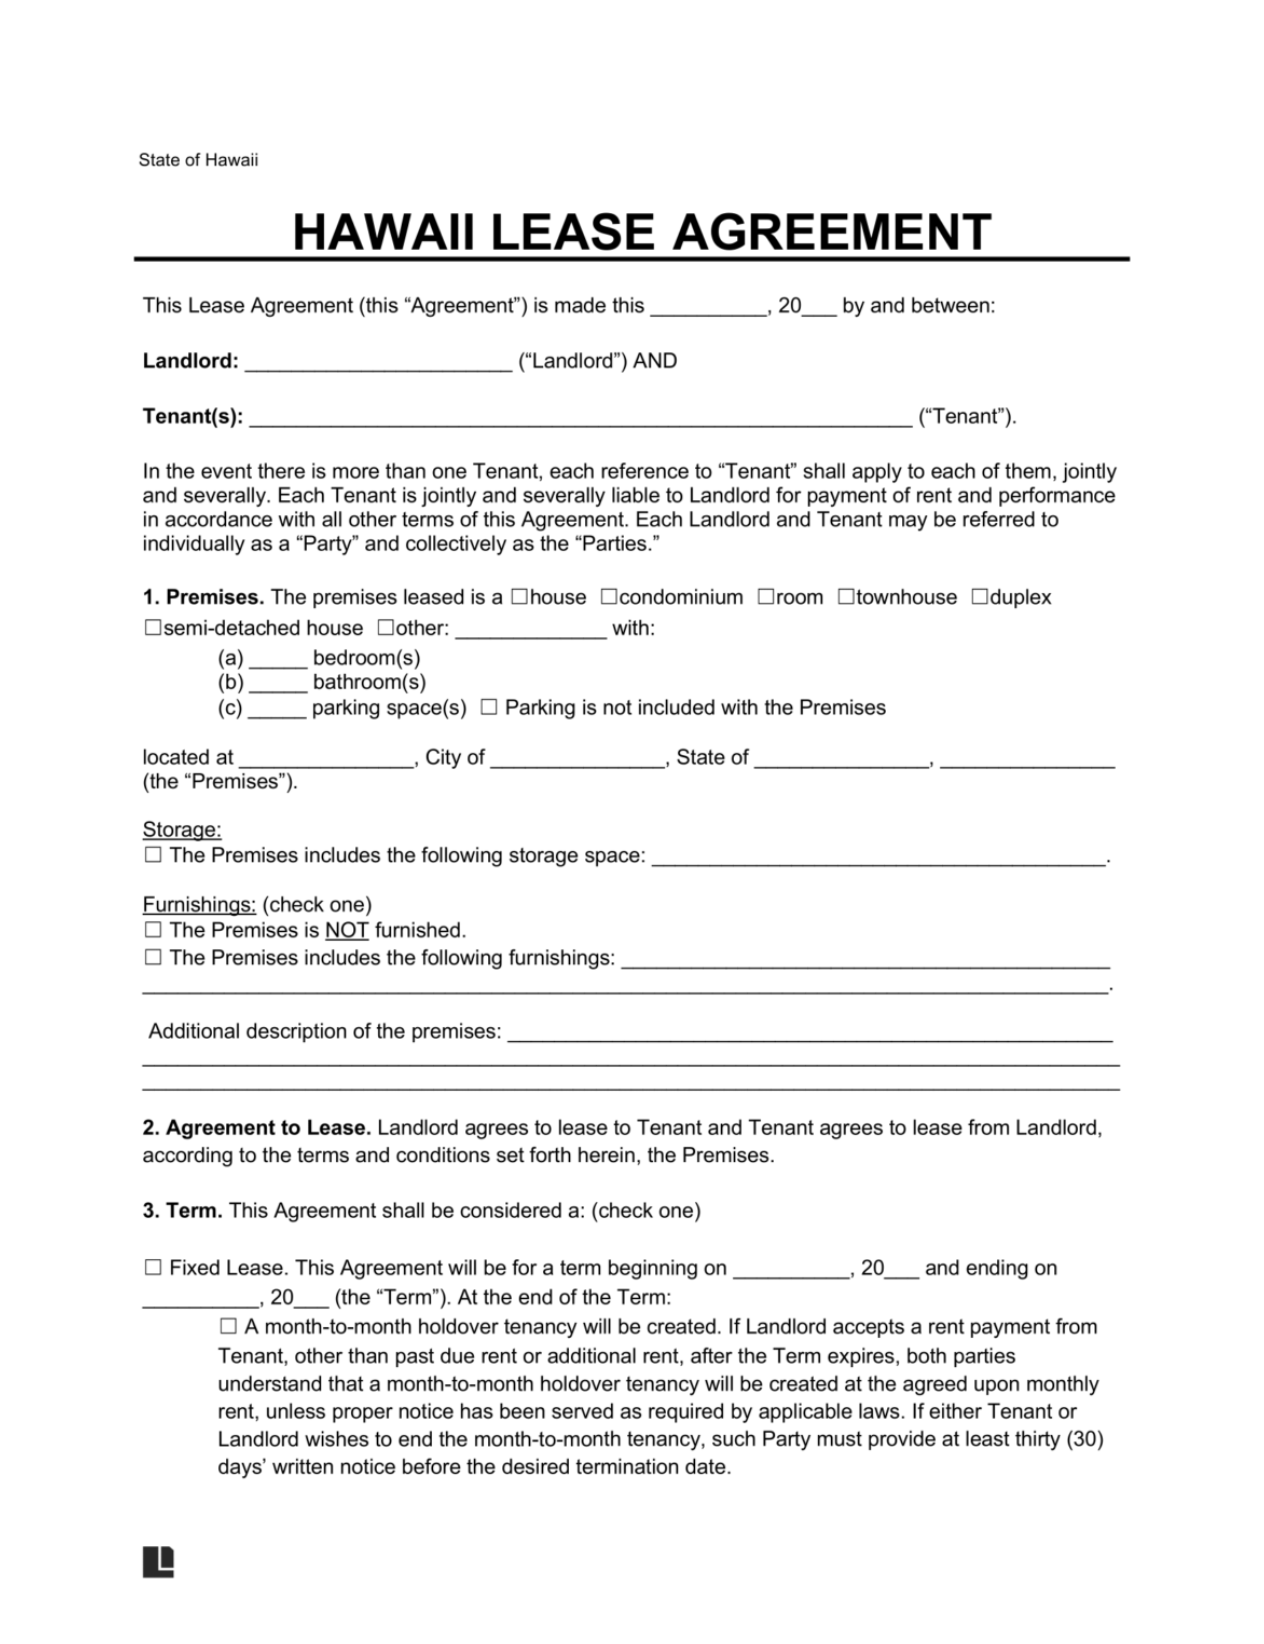 LegalTemplates Hawaii Residential Lease Agreement 